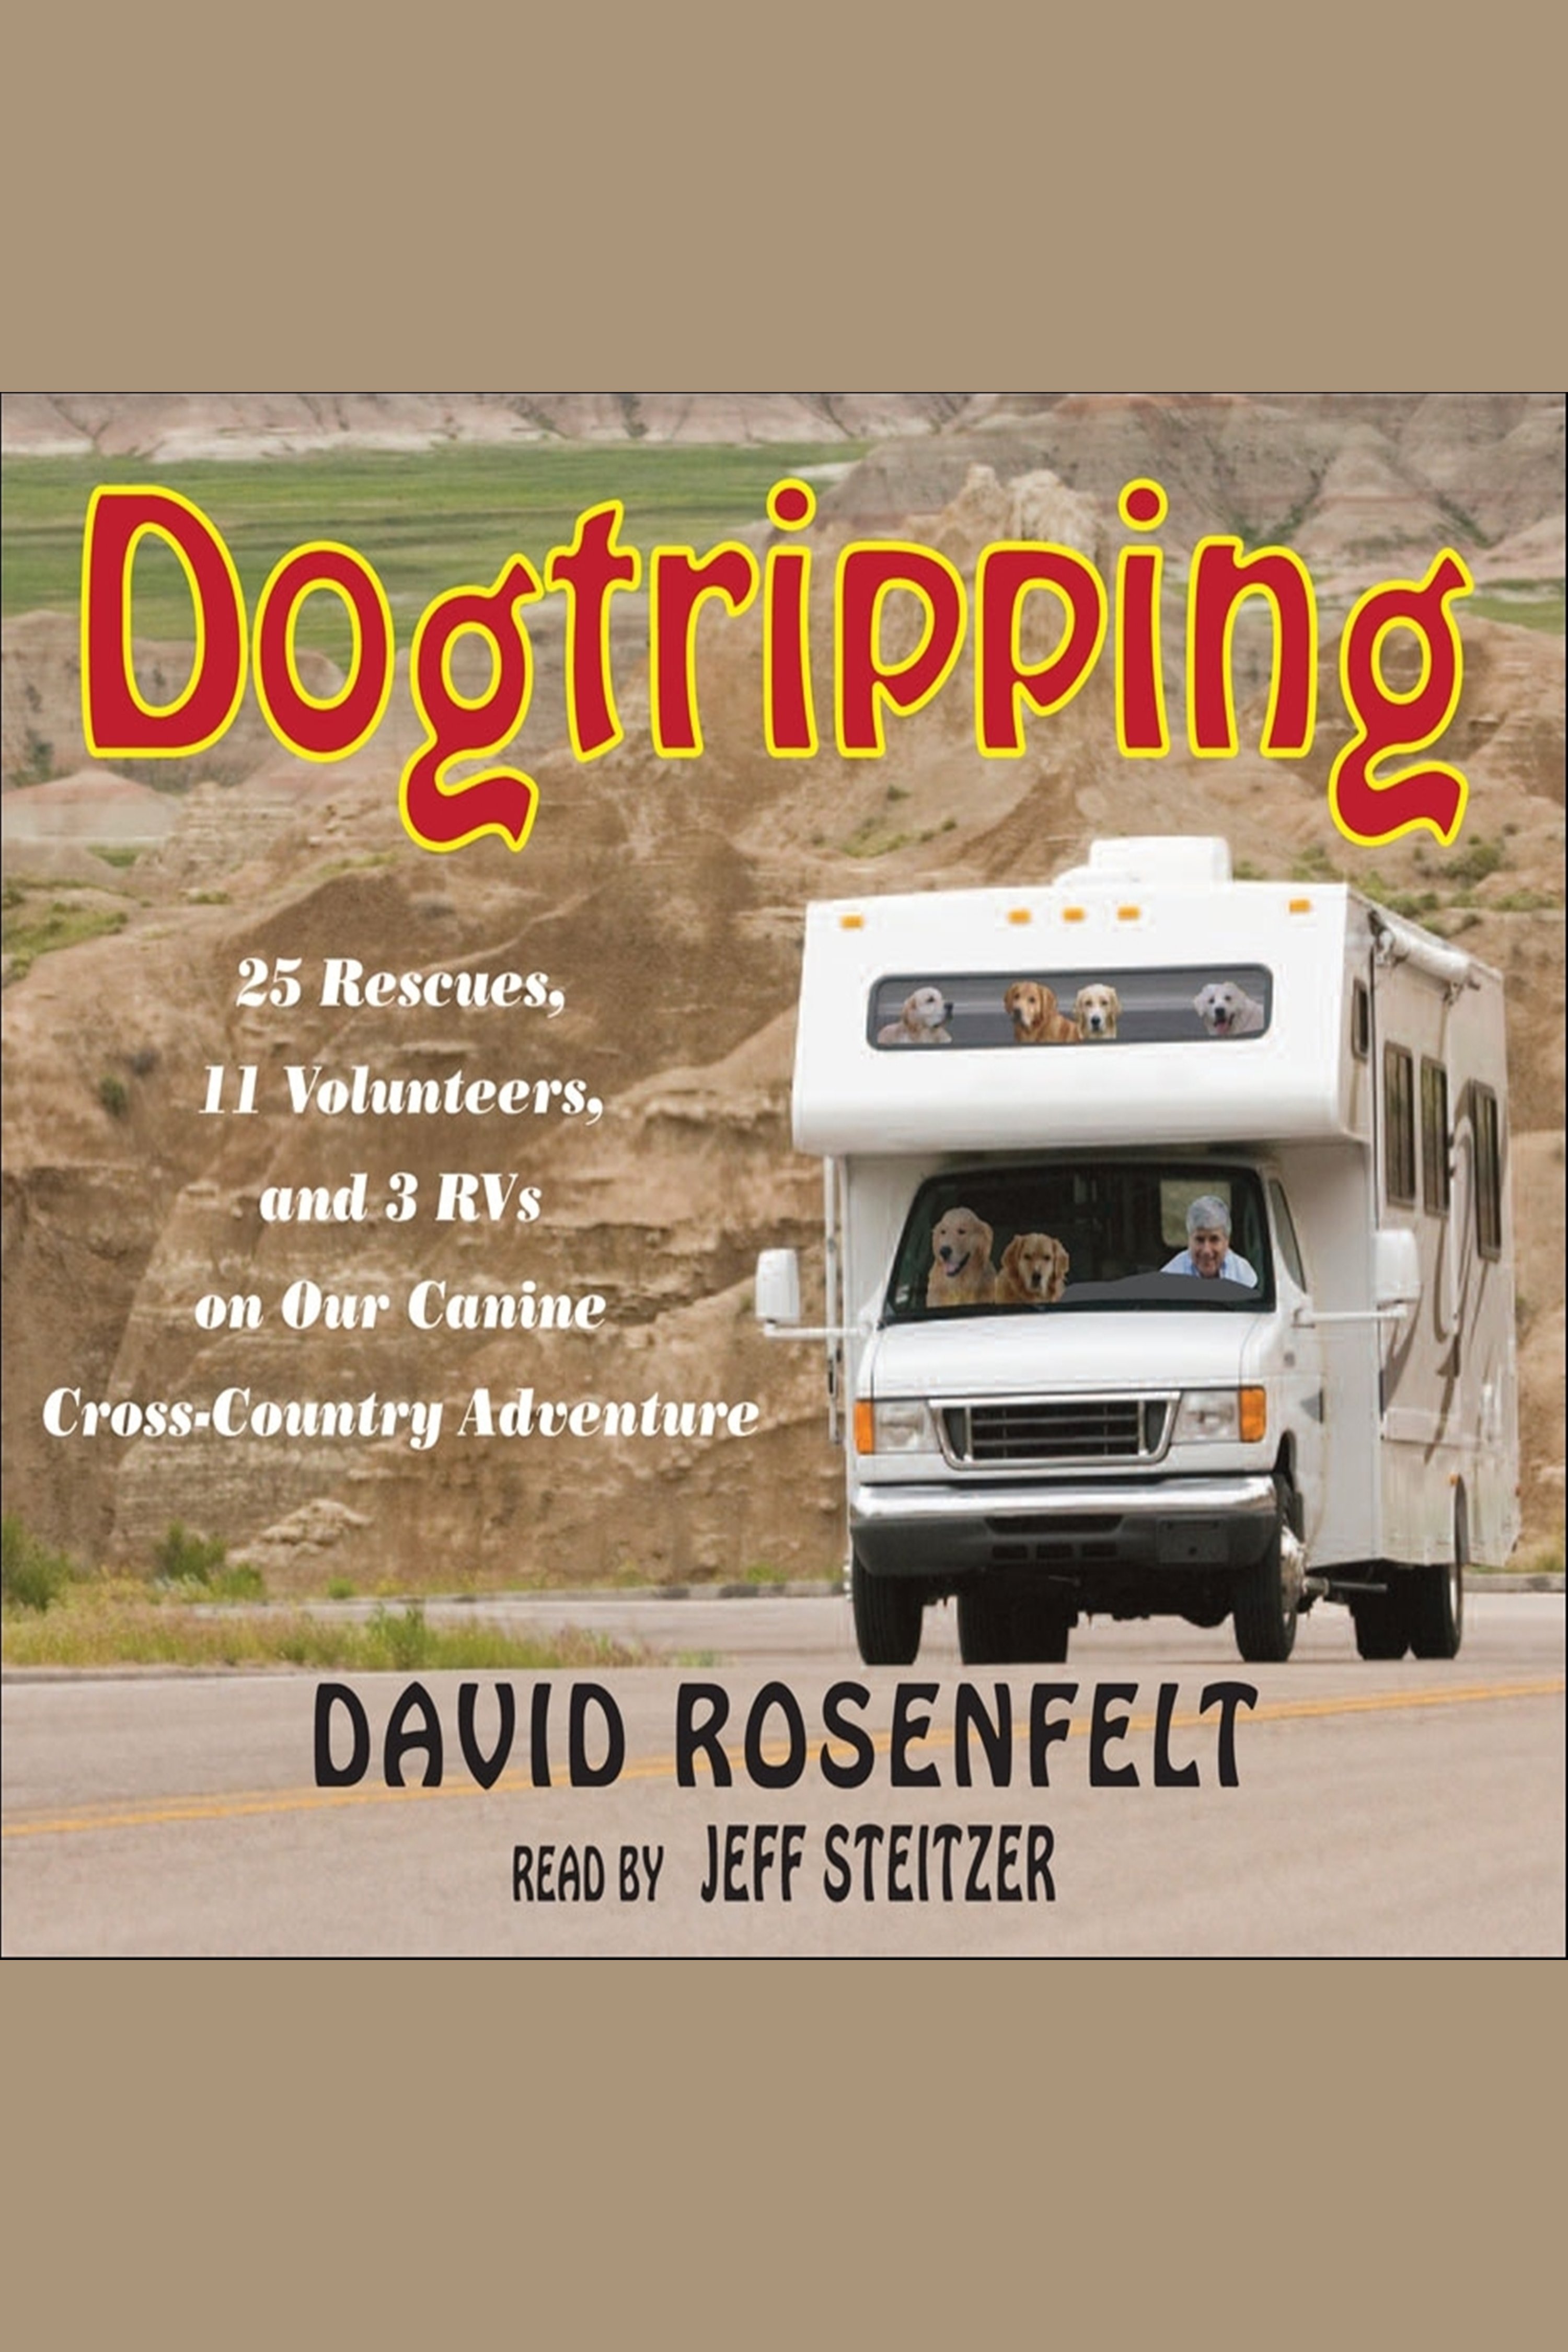 Imagen de portada para Dogtripping [electronic resource] : 25 Rescues, 11 Volunteers, and 3 RVs on Our Canine Cross-Country Adventure